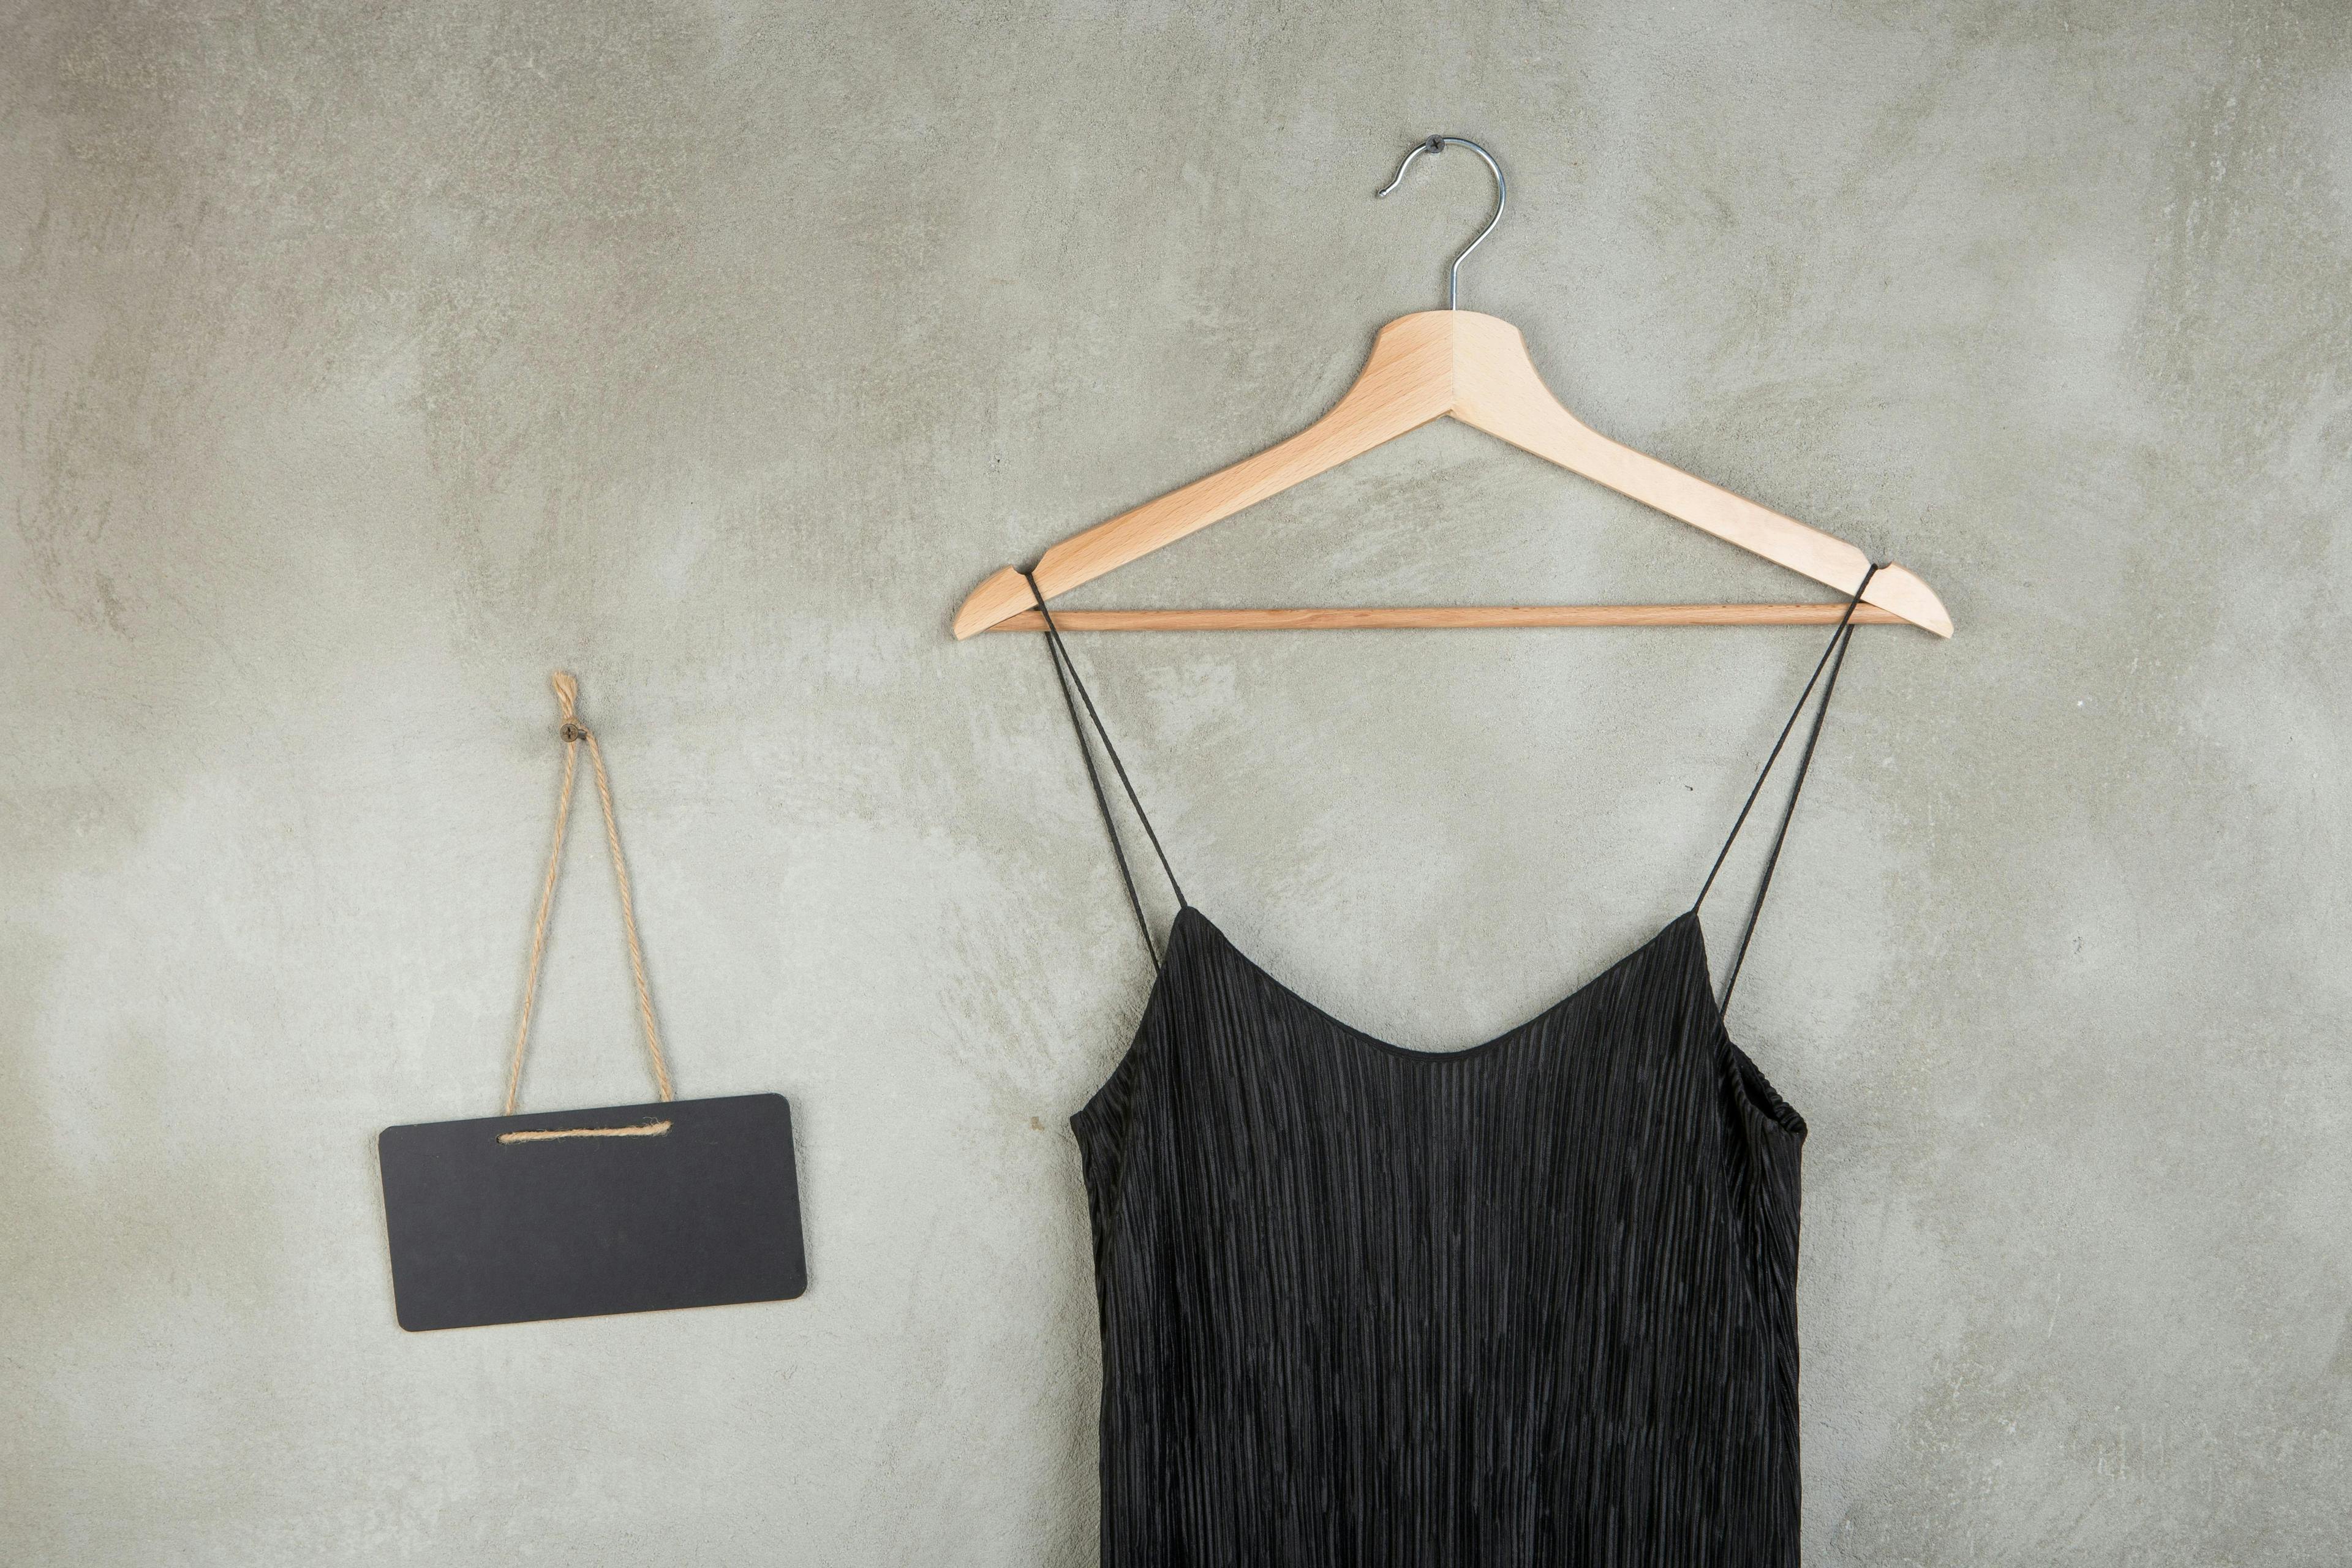 dress,beauty,apparel,beautiful,outfit,casual,copy space,garment,text,female,hanger,new,textile,fashionable,background,fabric,vintage,indoor,clothing,style,cloth,little,object,women,concrete,blackboard,blank,shop,color,concept,wear,summer,interior,modern,design,elegant,black,closet,store,clothes,grey,stylish,elegance,sale,choice,hanging,chalkboard,wall,fashion